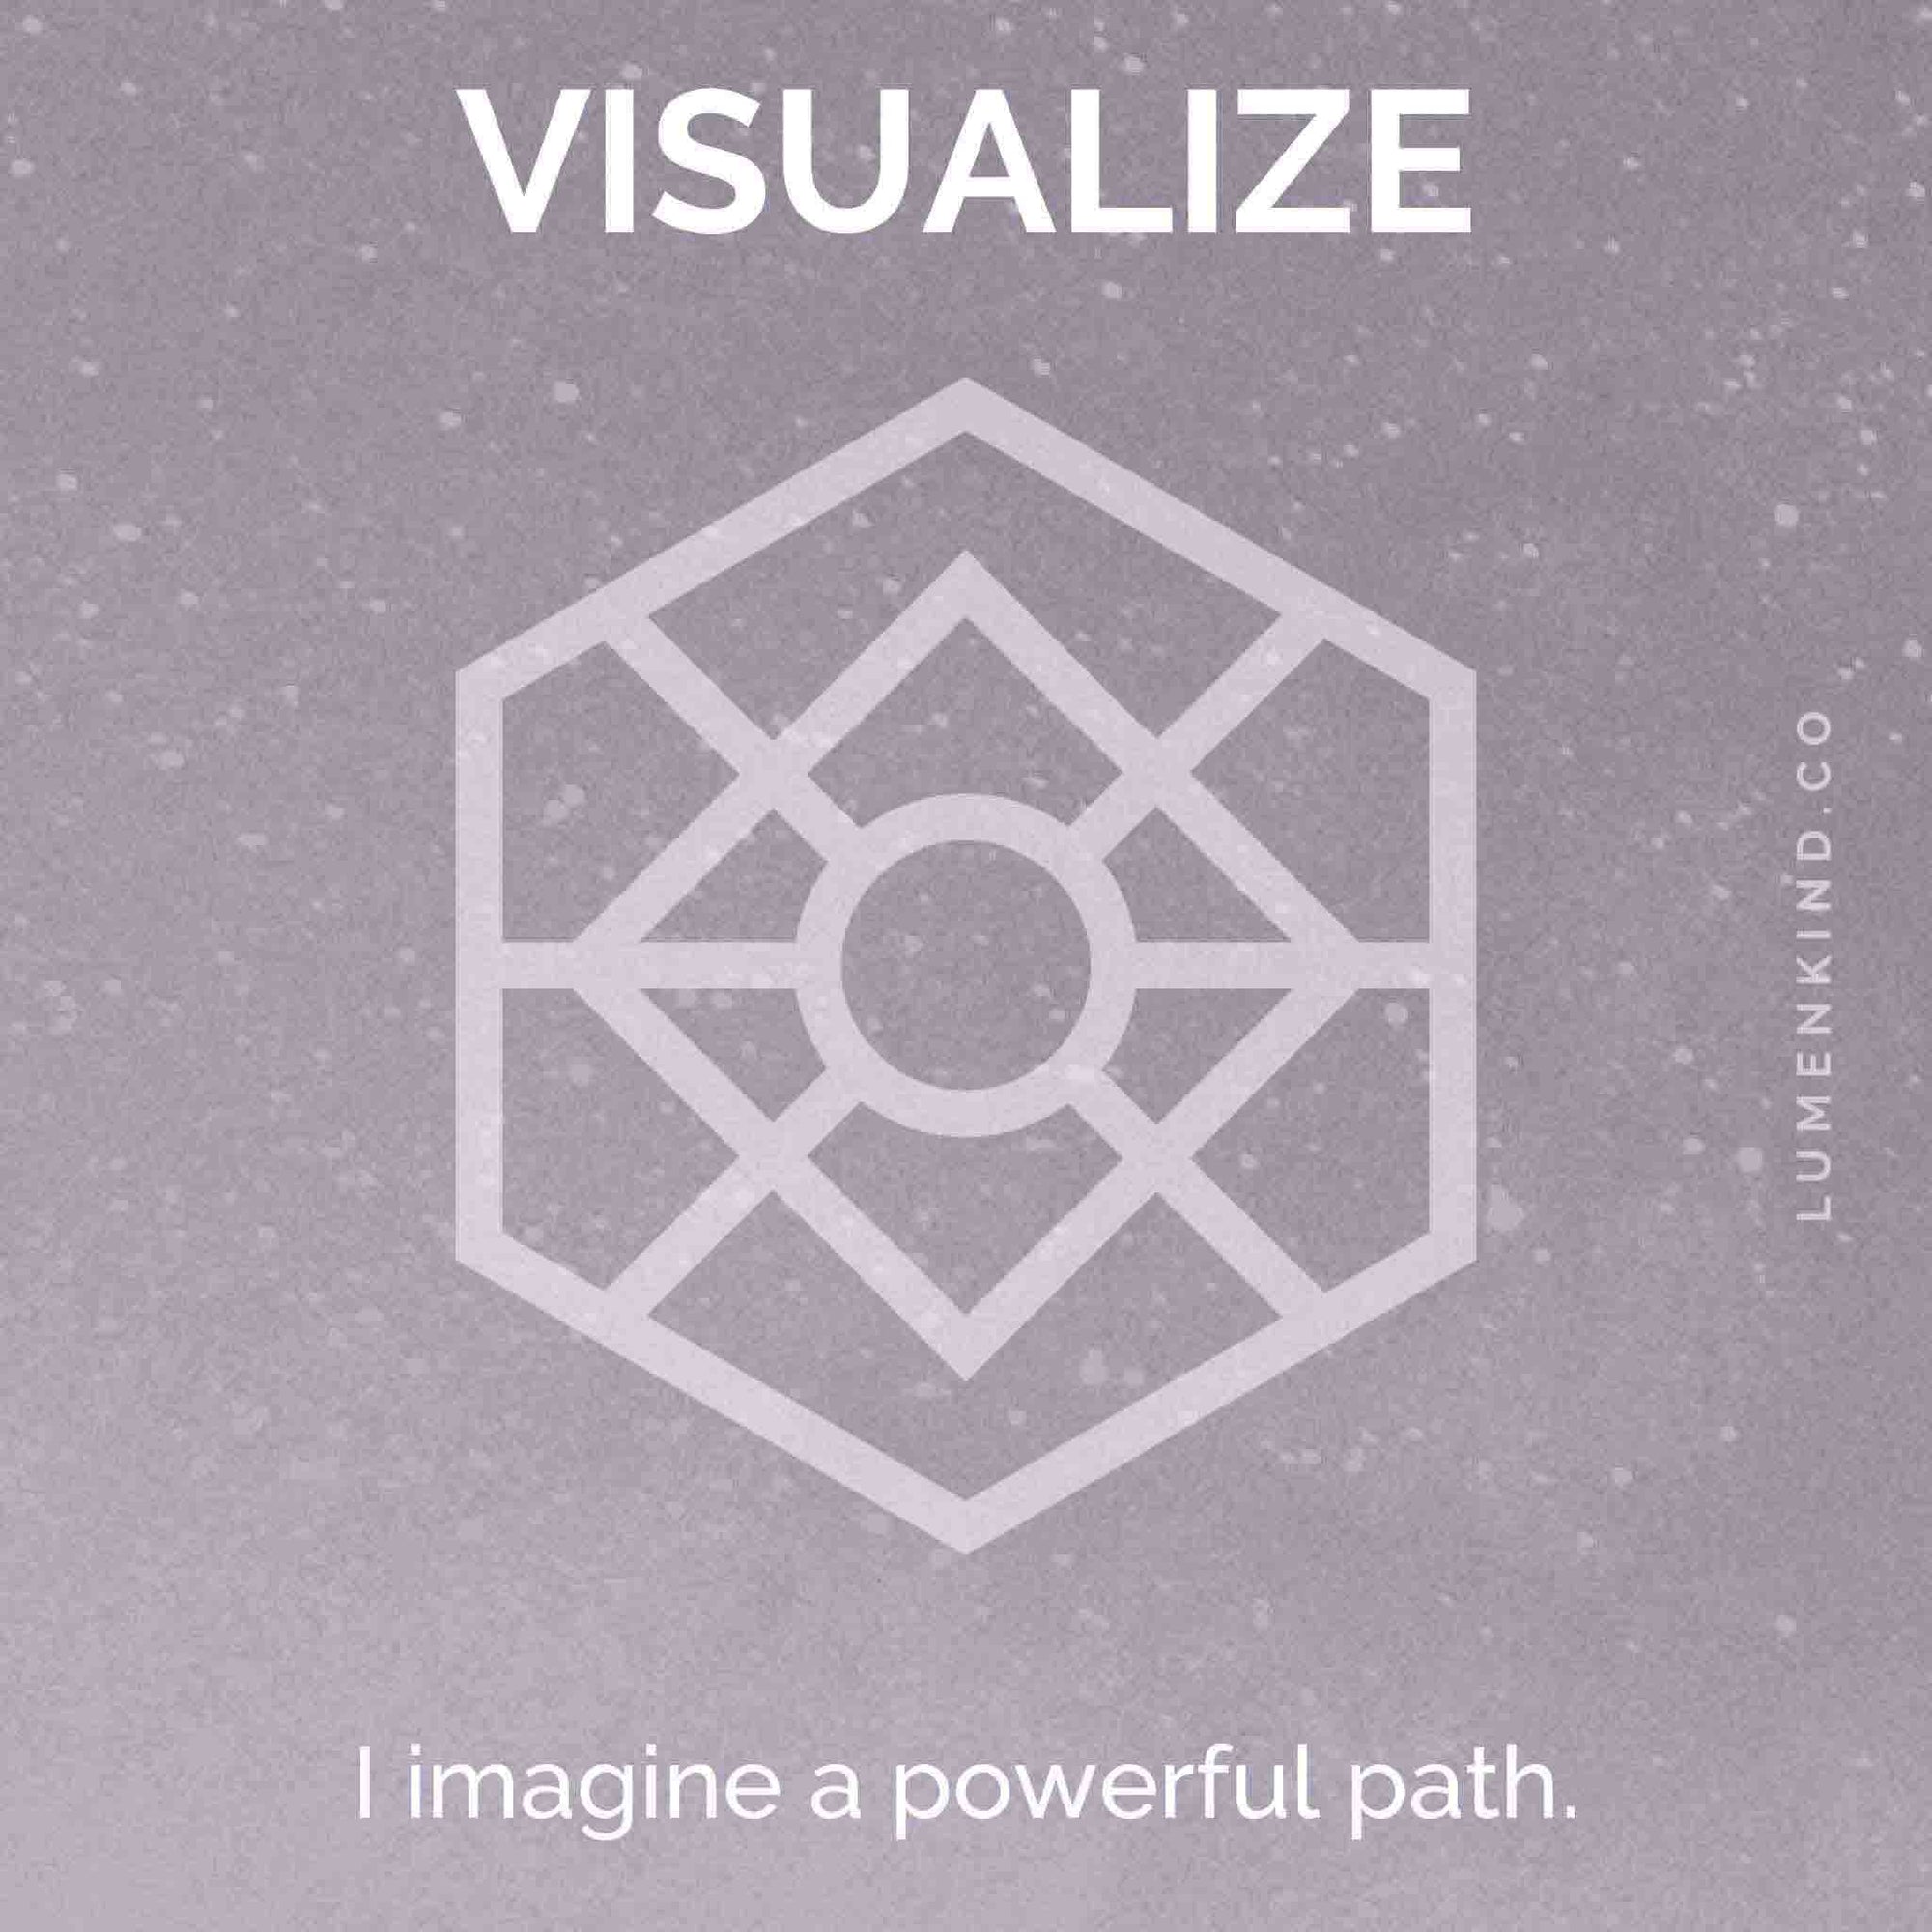 The suggested intention is VISUALIZE. I imagine a powerful path.